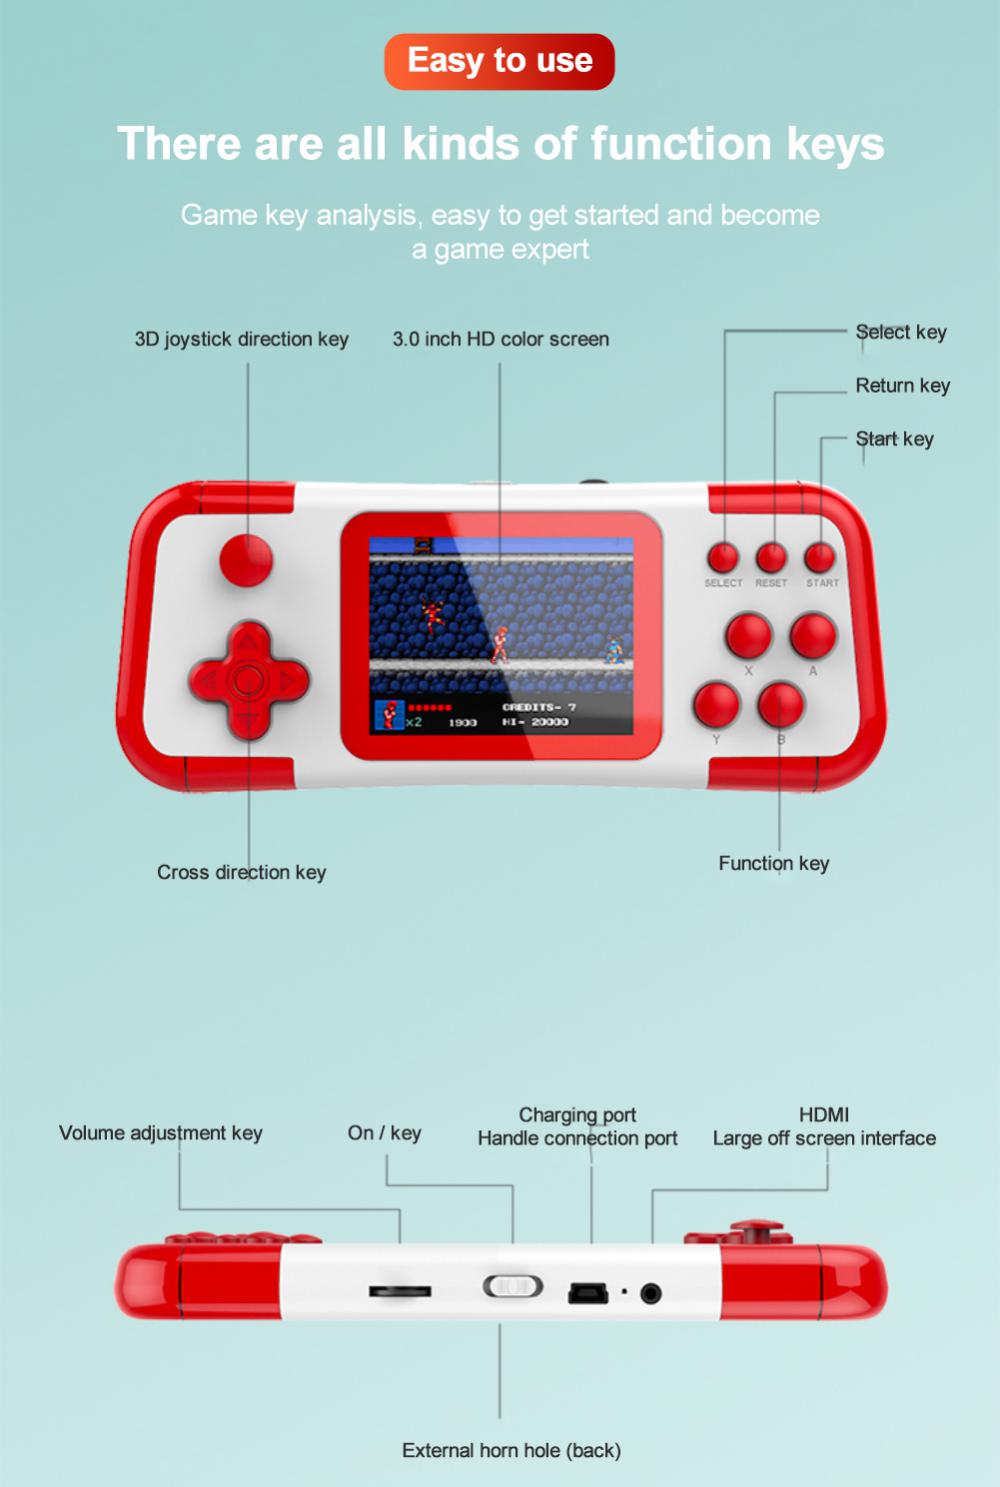 A12-30inch-TFT-HD-Color-Screen-Retro-Handheld-Game-Console-Built-in-666-Classic-Games-3D-Joystick-Po-1976539-10